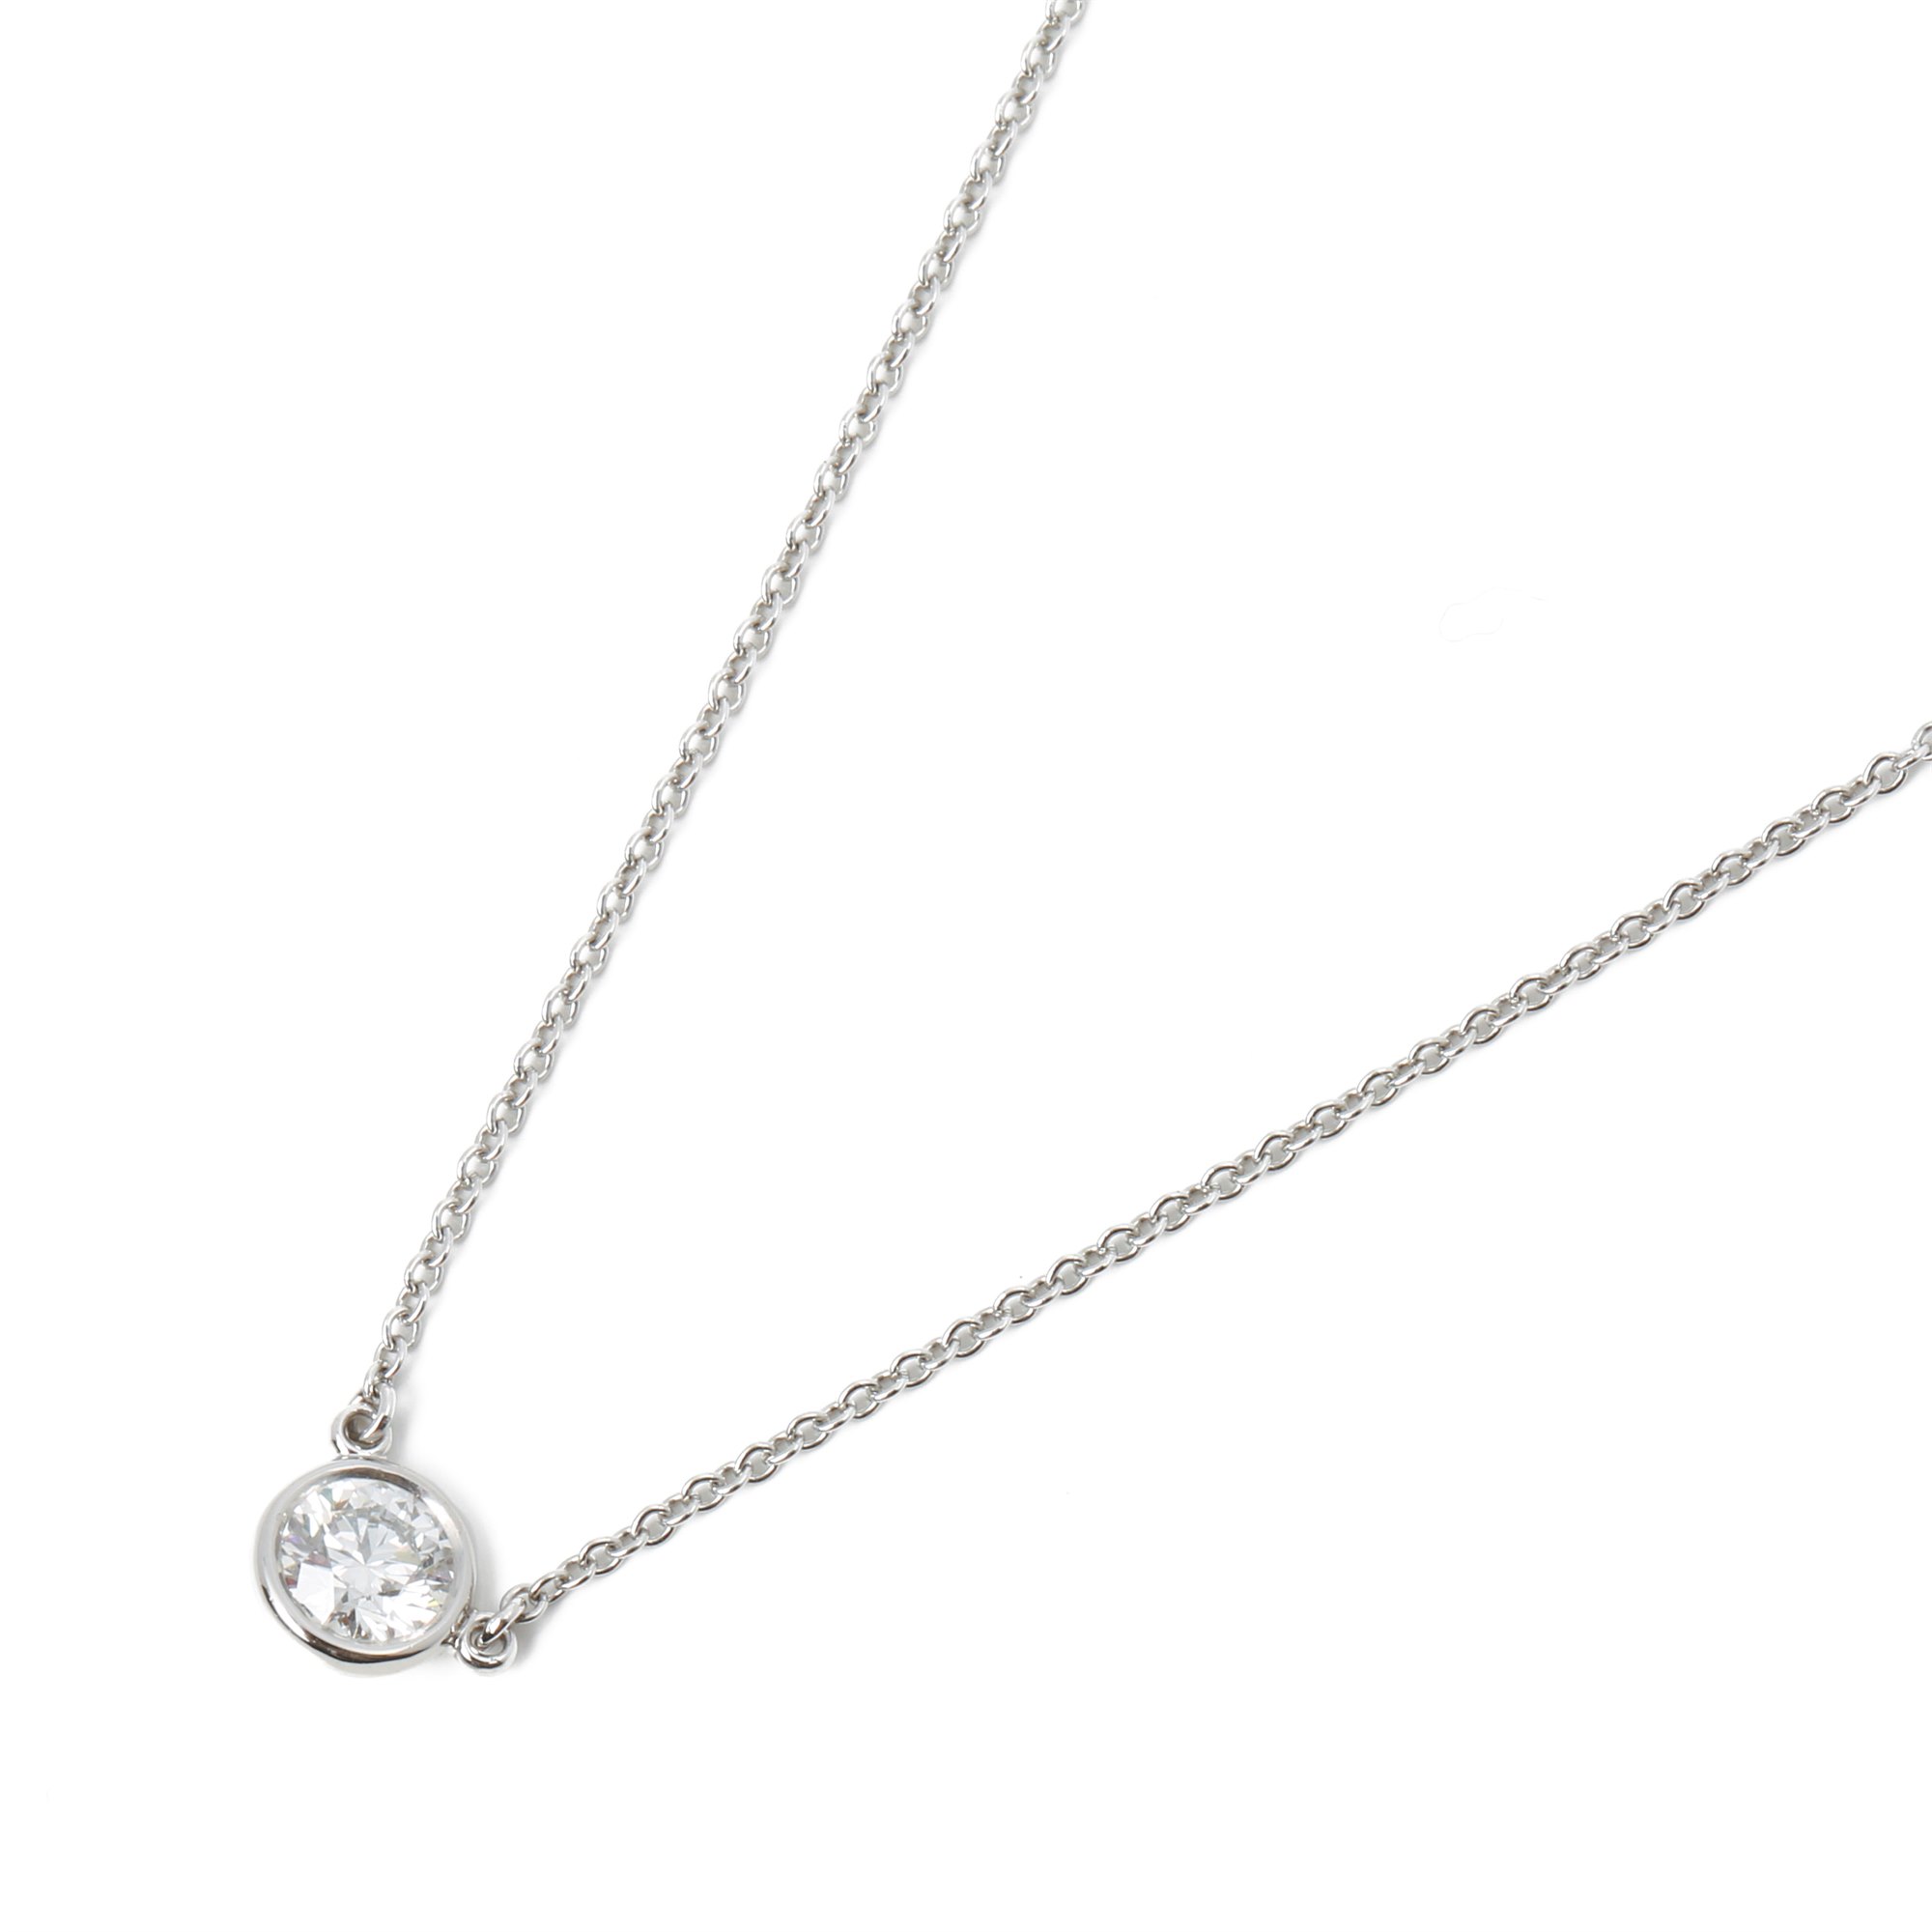 Tiffany & Co. Diamonds by the Yard 0.35ct Pendant Necklace